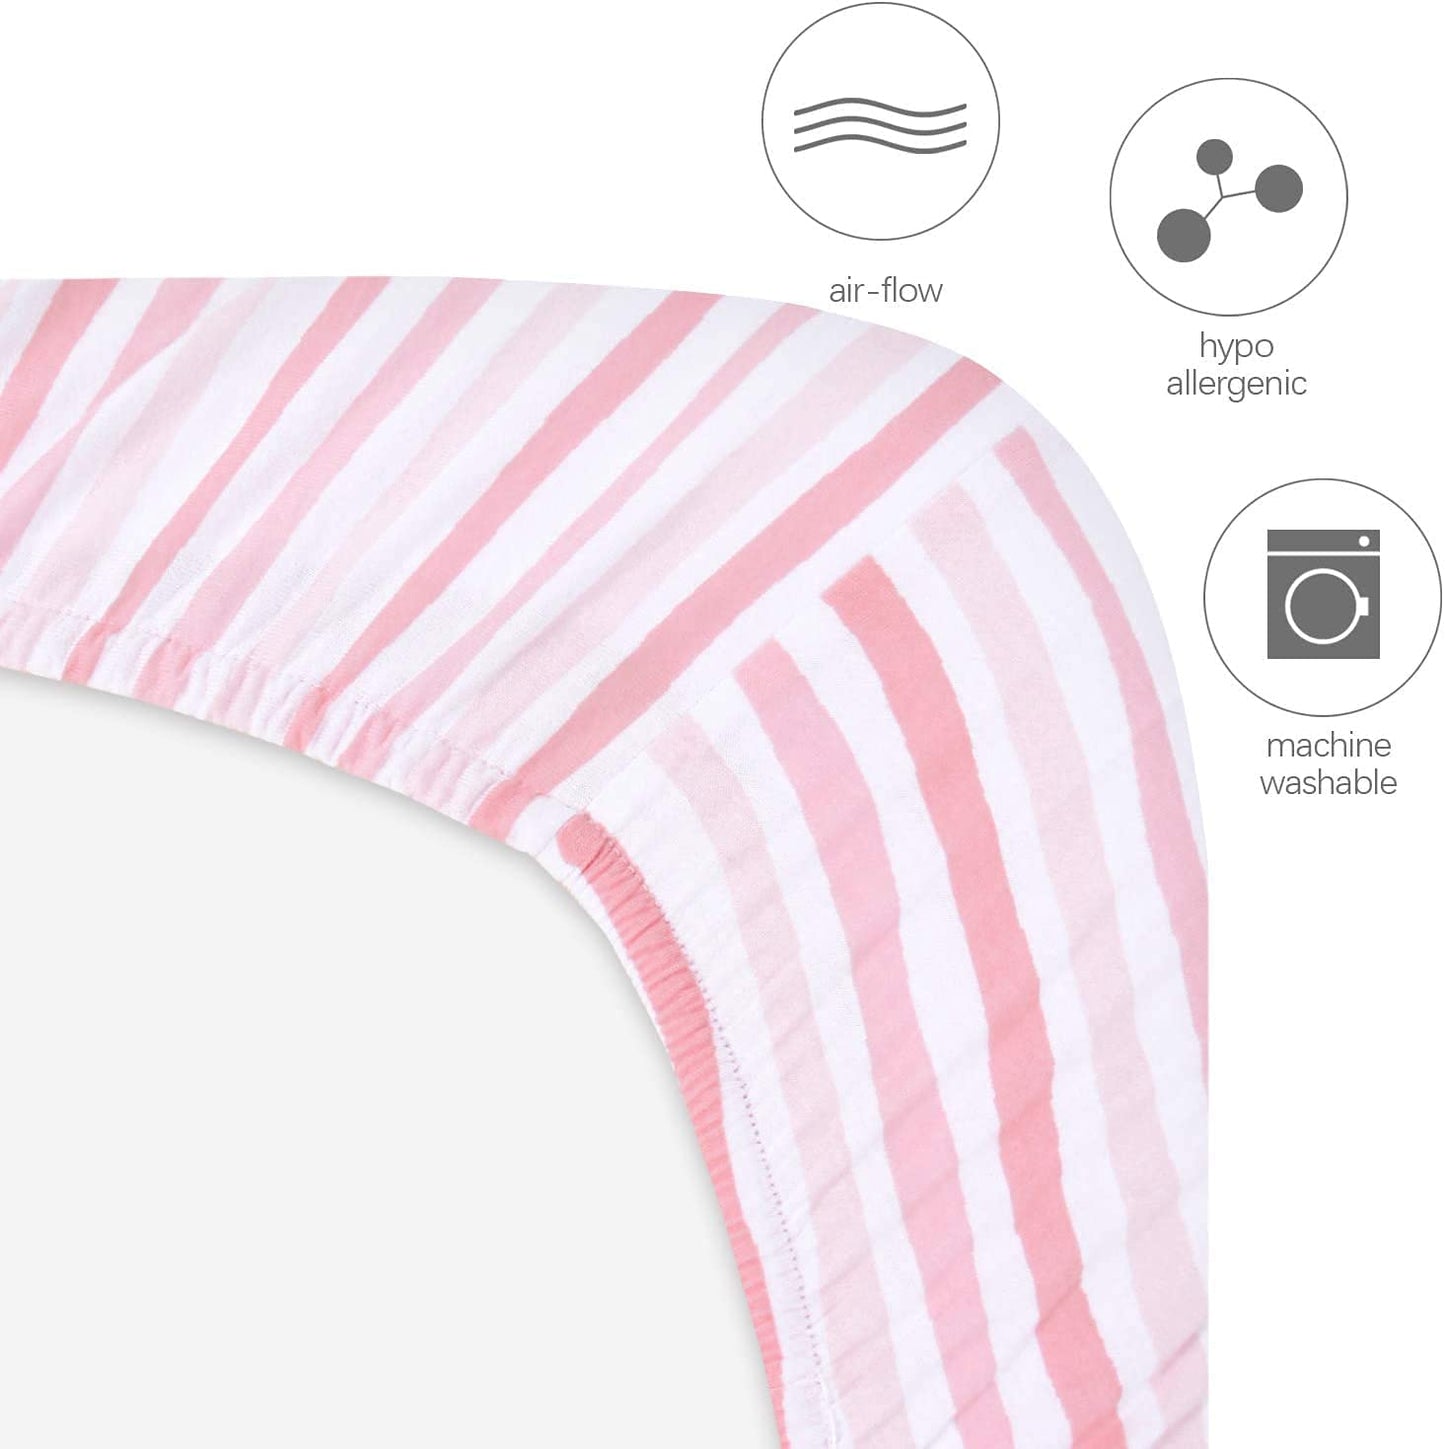 Bassinet Sheets - Fit Chicco LullaGo Portable Bassinet  (17"X33"), 2 Pack, 100% Jersey Cotton